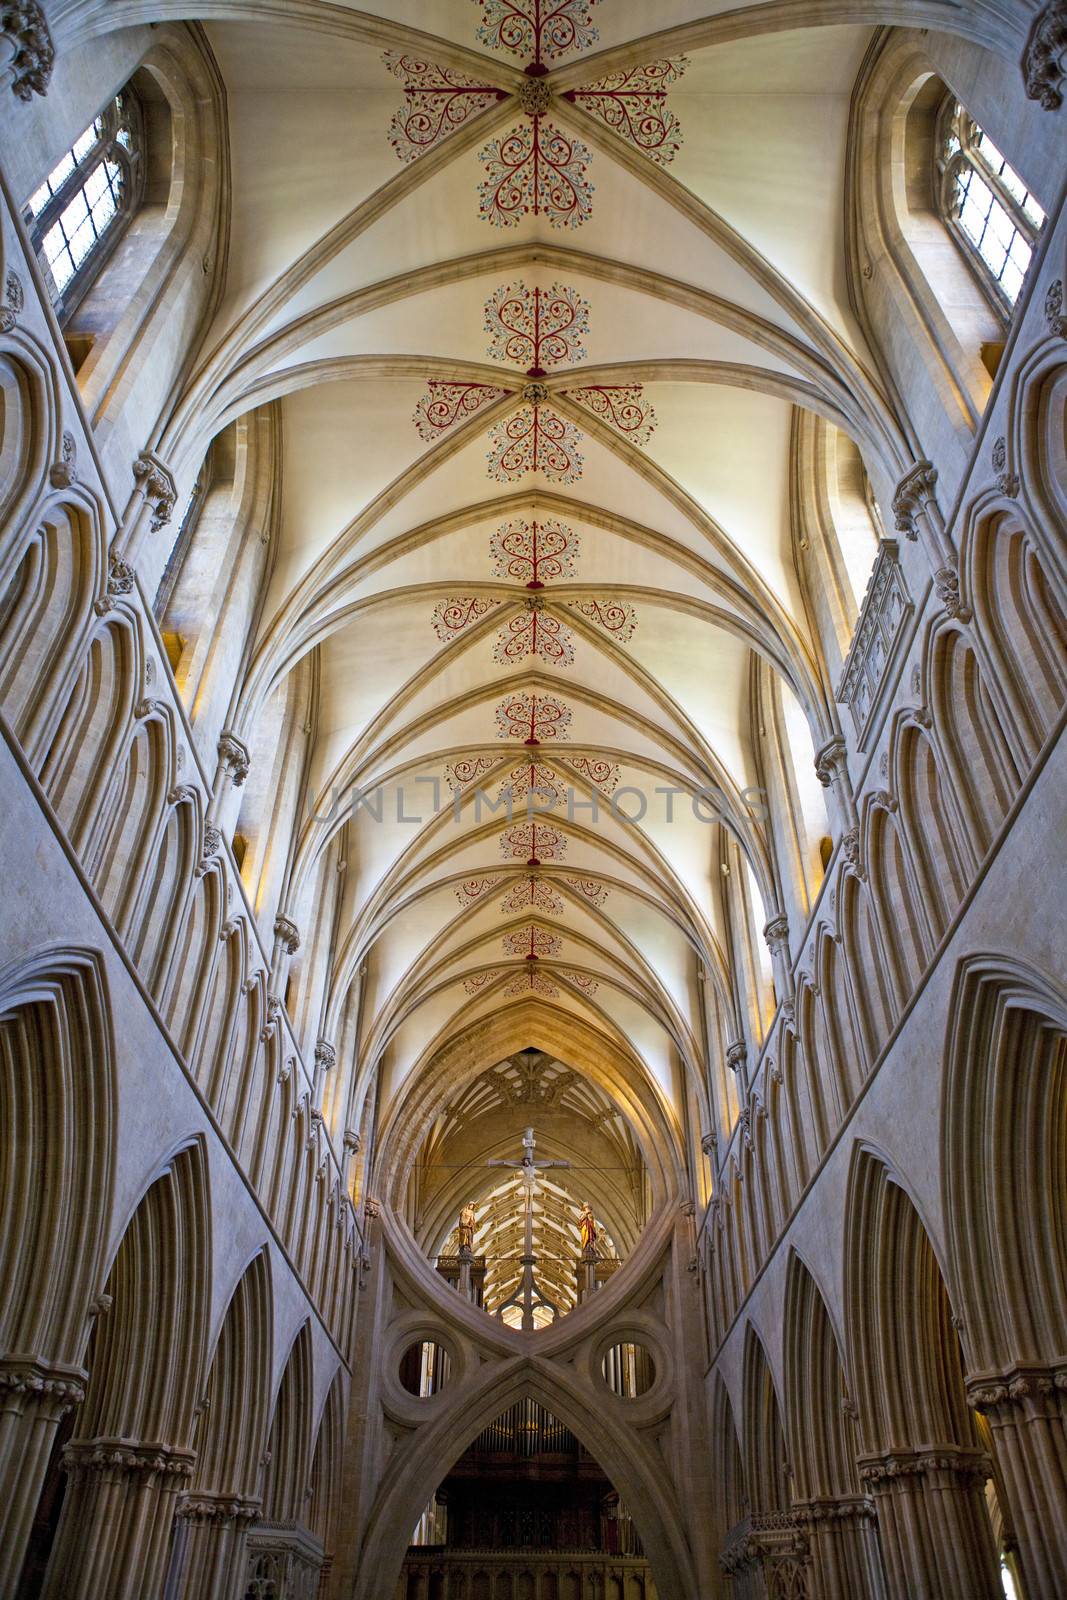 The magnificent Wells Cathedral in Somerset.